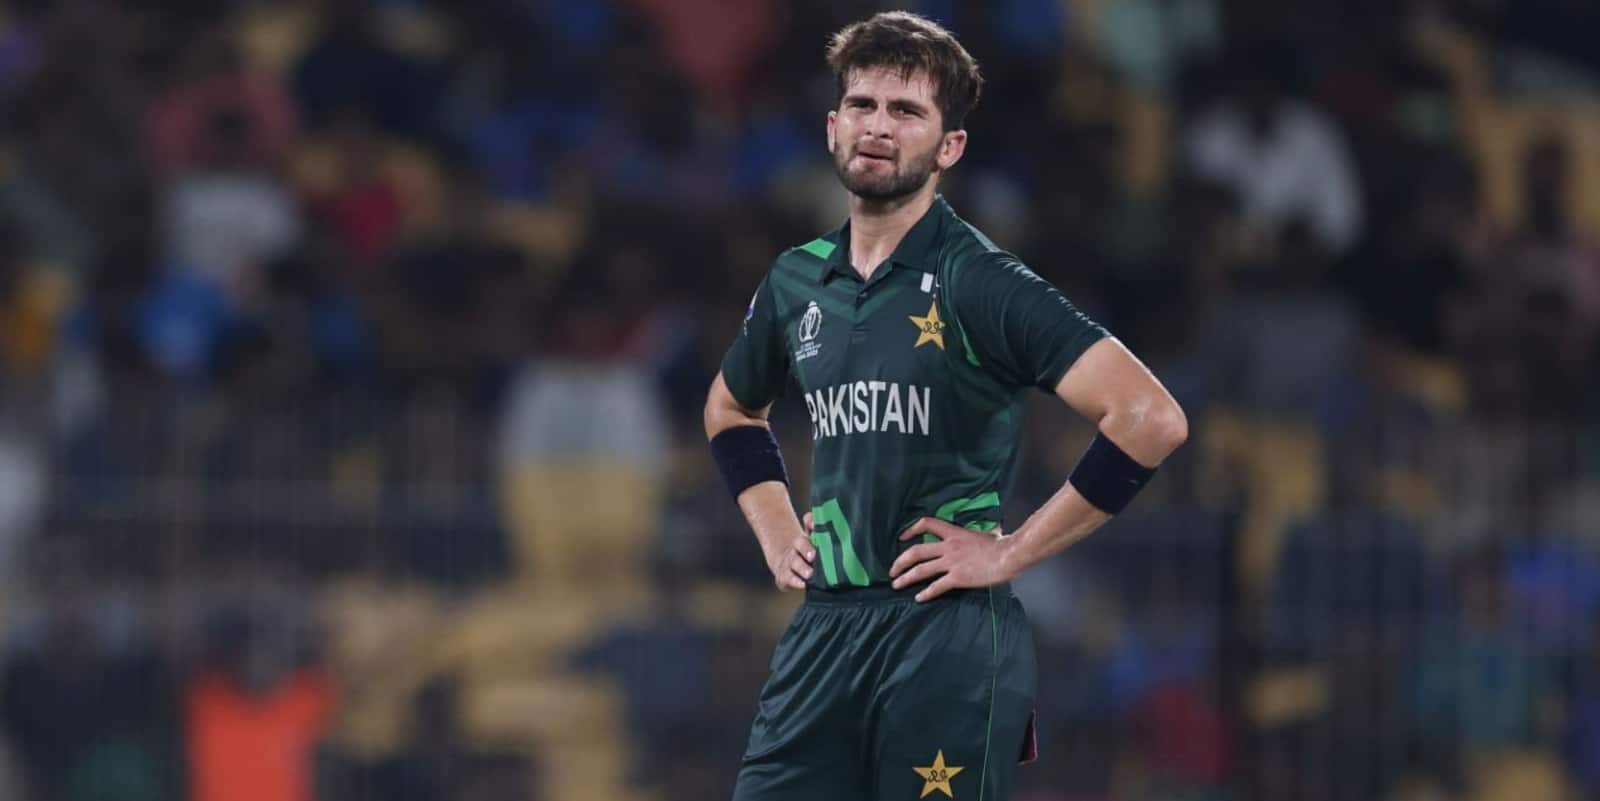 Shaheen was removed as Pakistan skipper [X]
